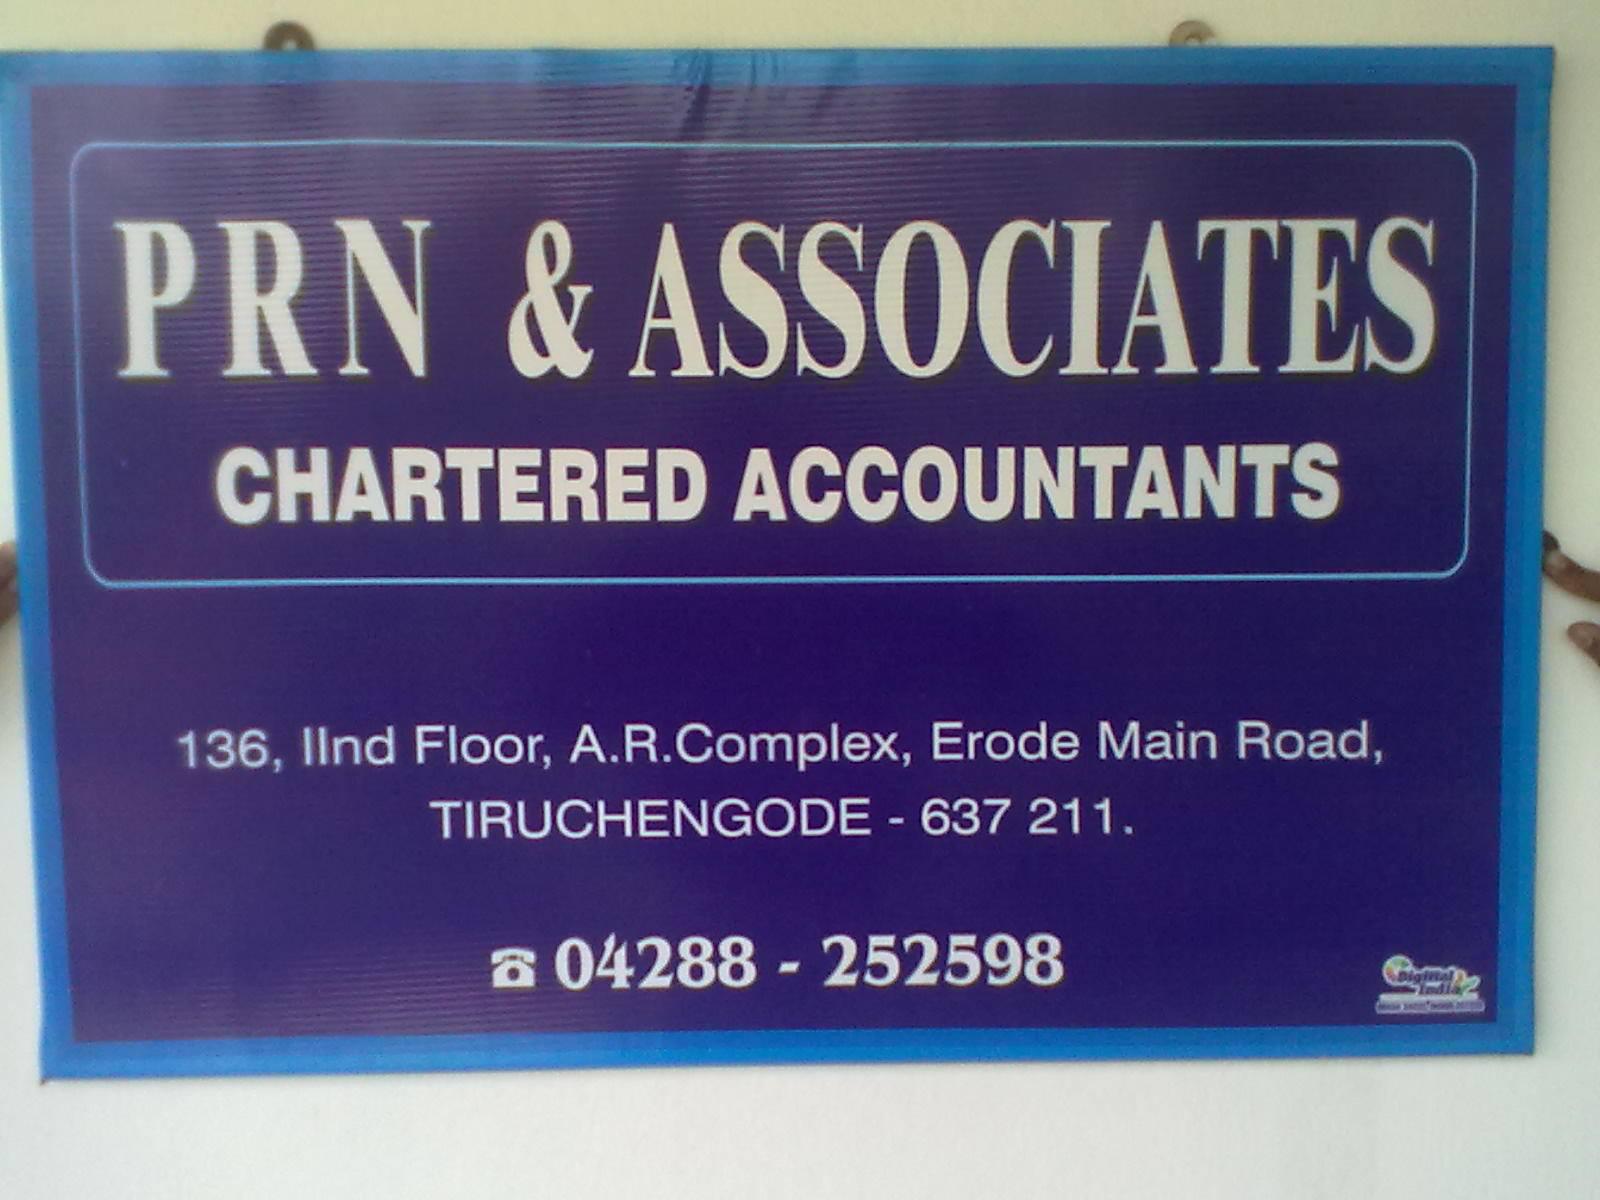 P R N & Associates profile on Qualified.One